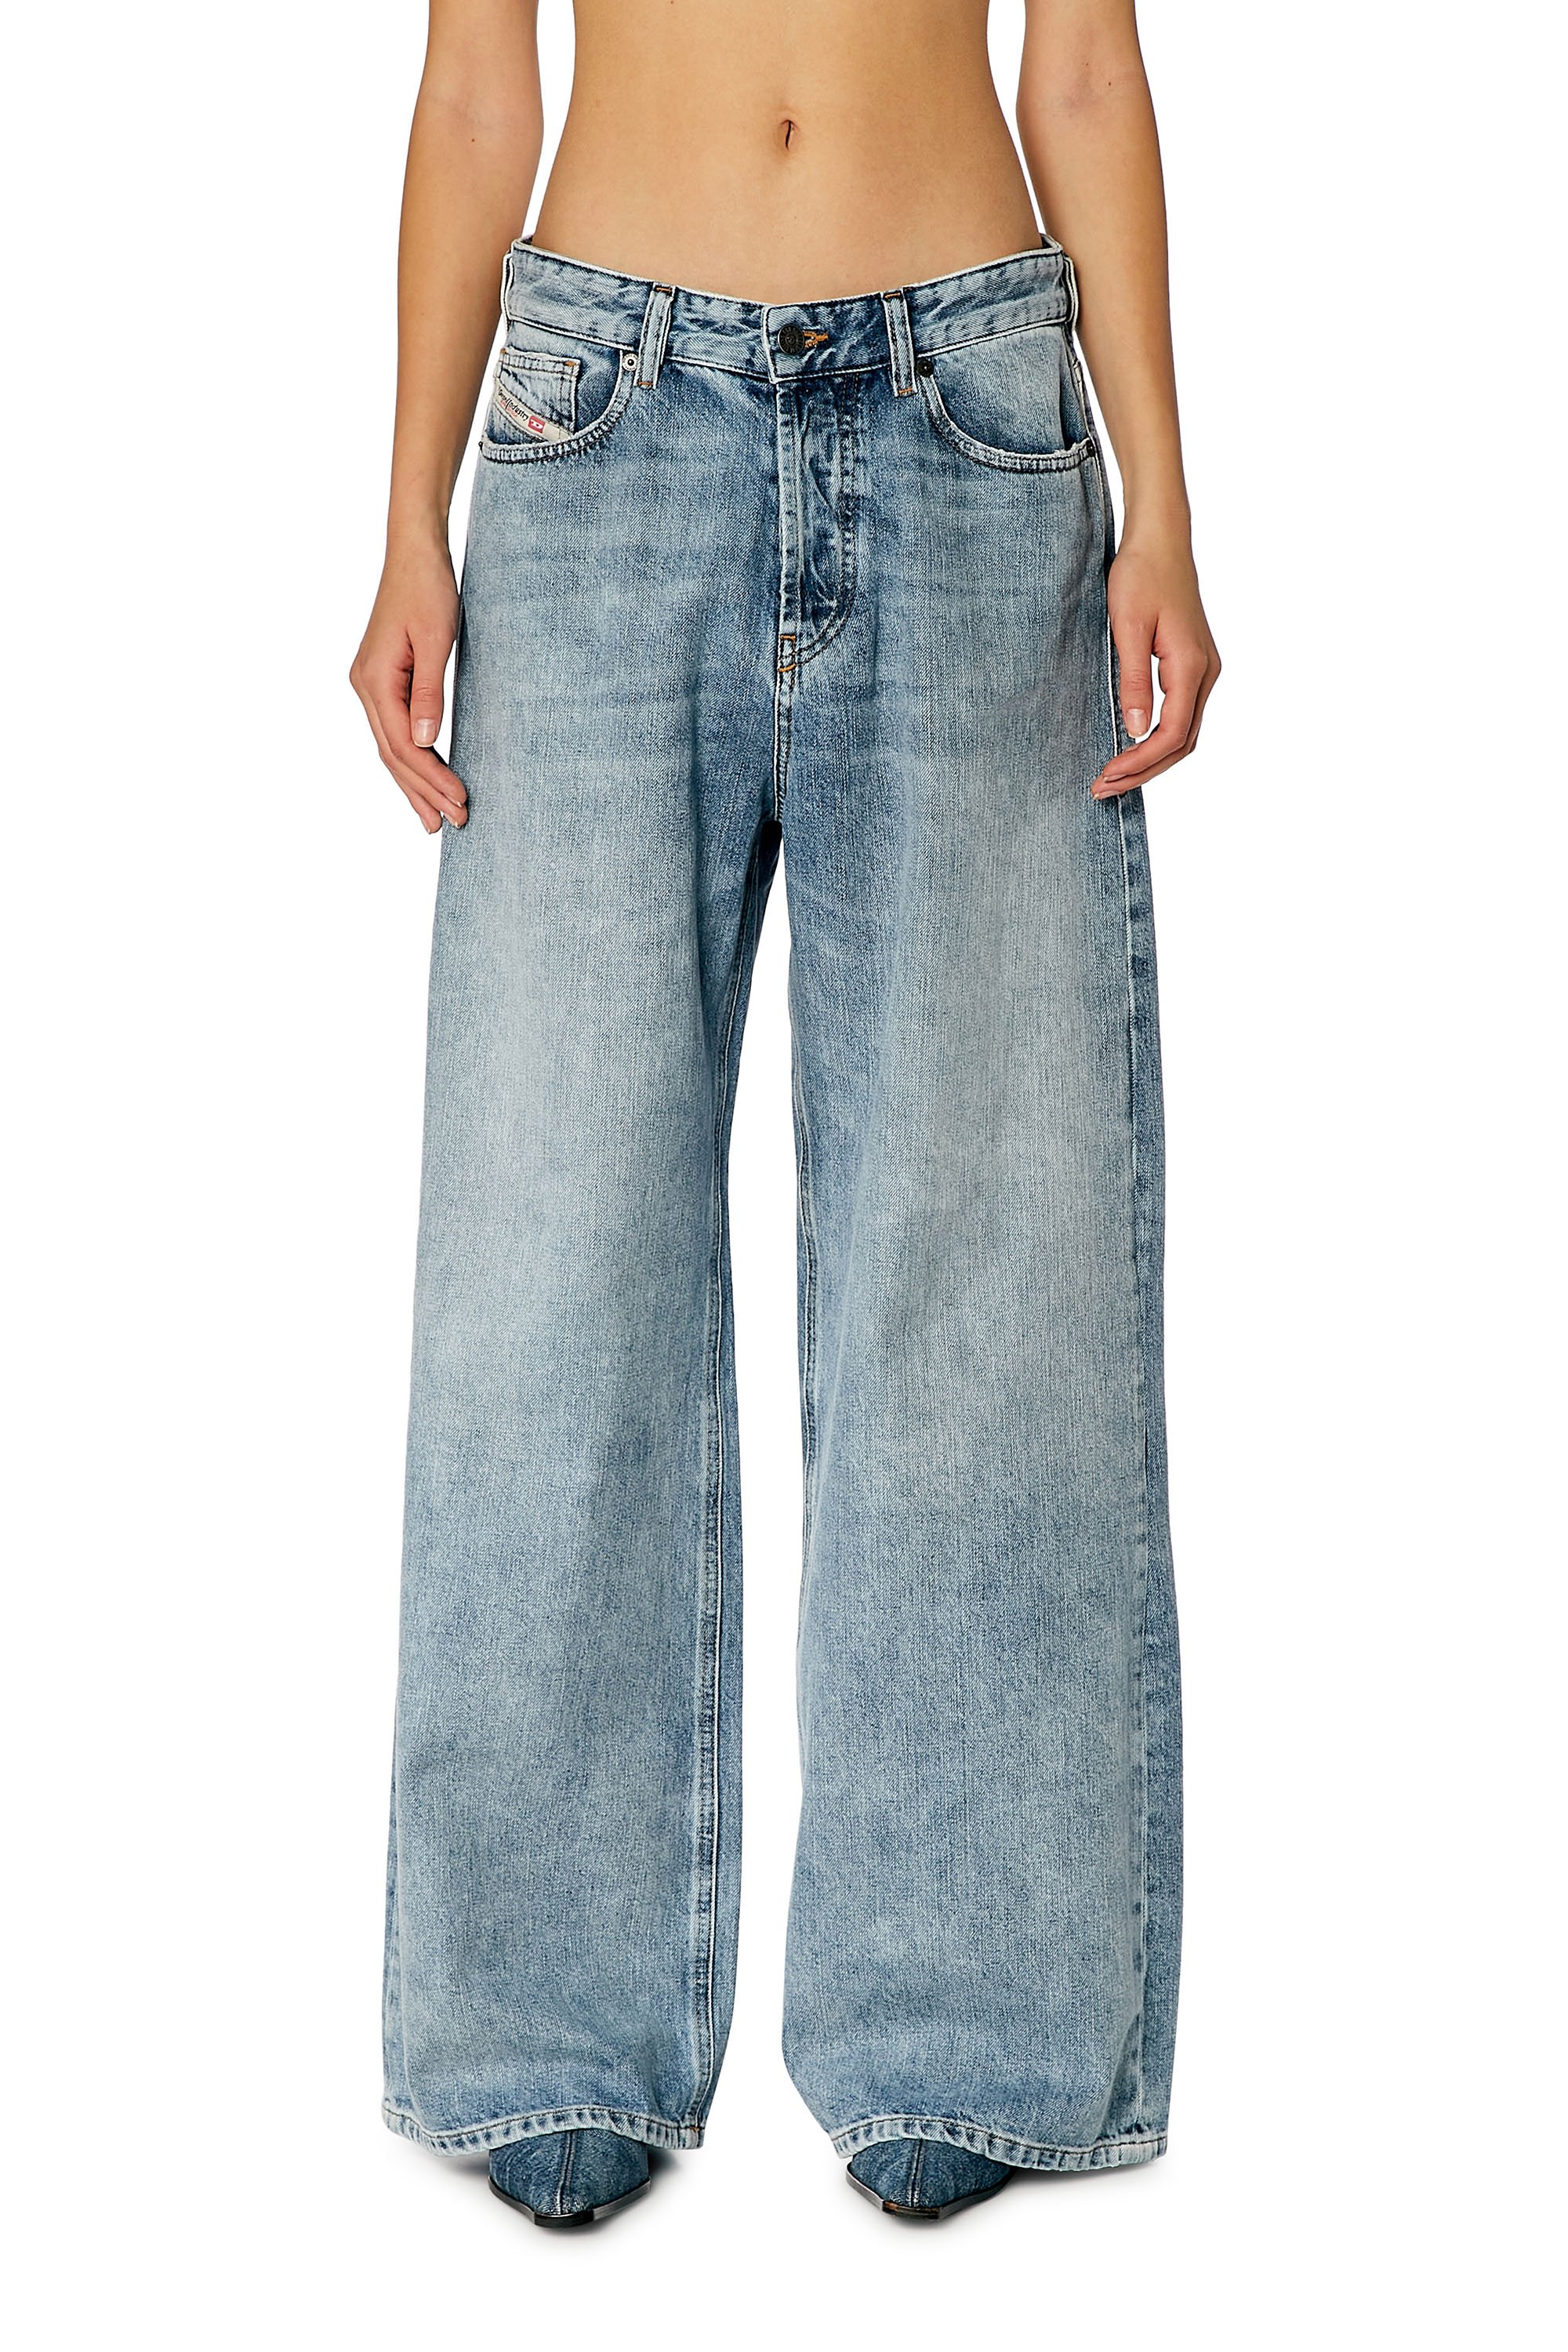 Diesel - Straight Jeans 1996 D-Sire 09H57, Mujer Straight Jeans - 1996 D-Sire in Azul marino - Image 2